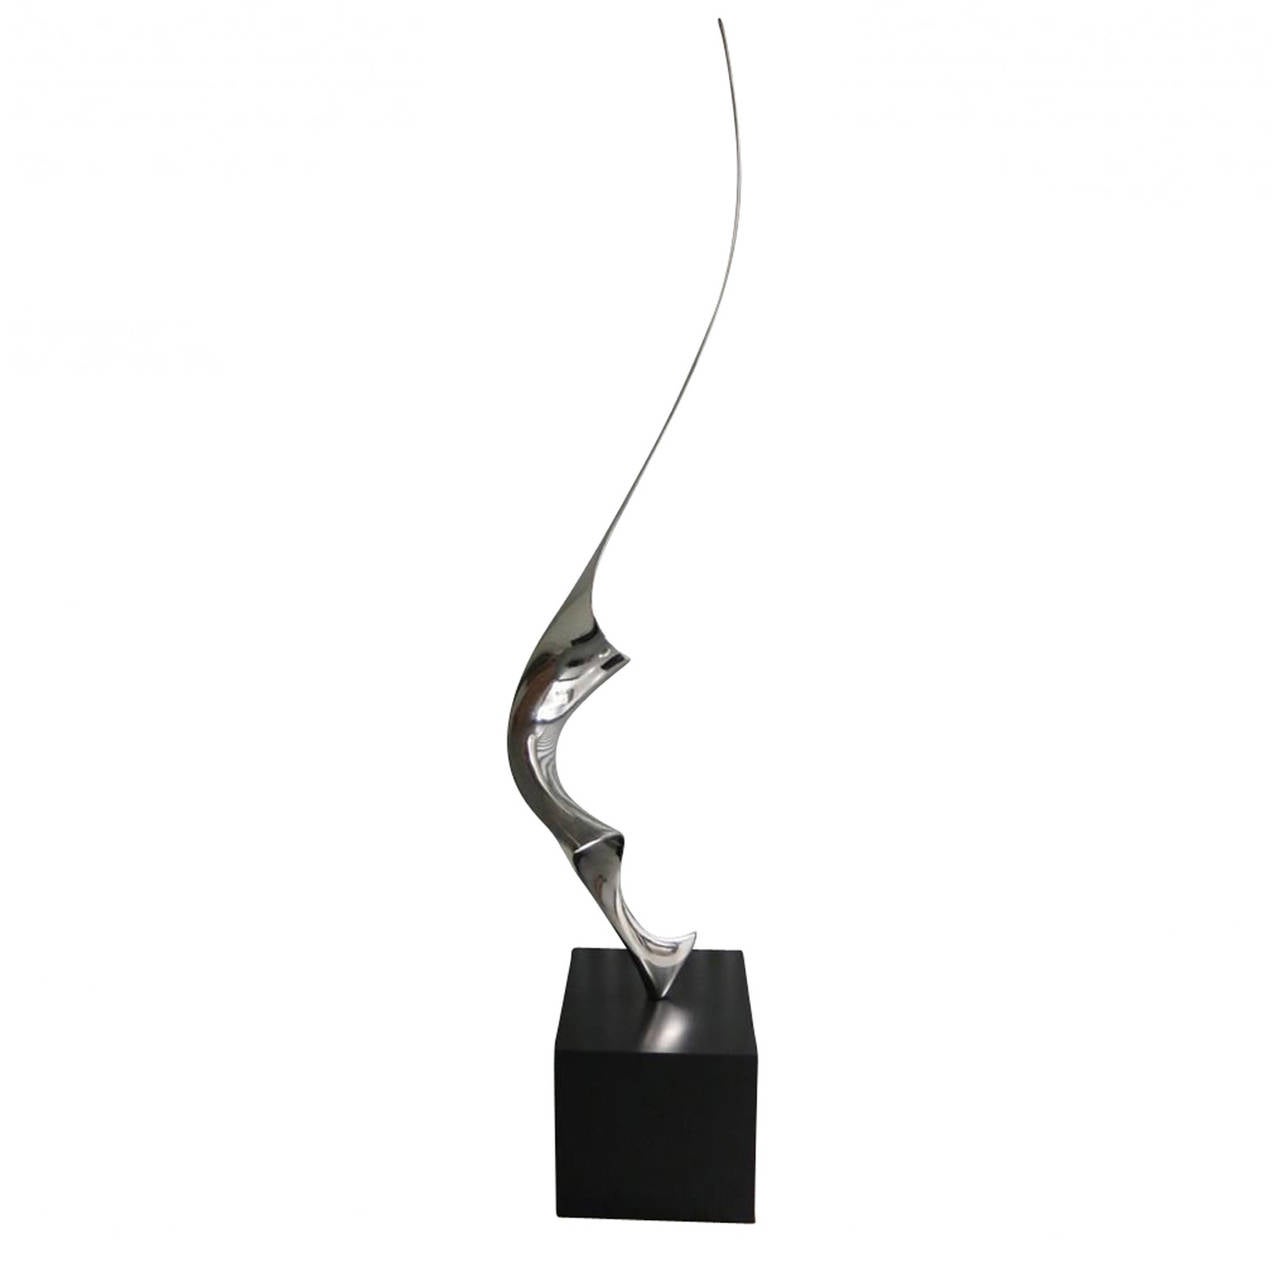 "Natalie" Stainless Steel Sculpture by Lou Pearson
Extraordinary work of Art
Perfect Conditions
Stands 7' feet 9" tall